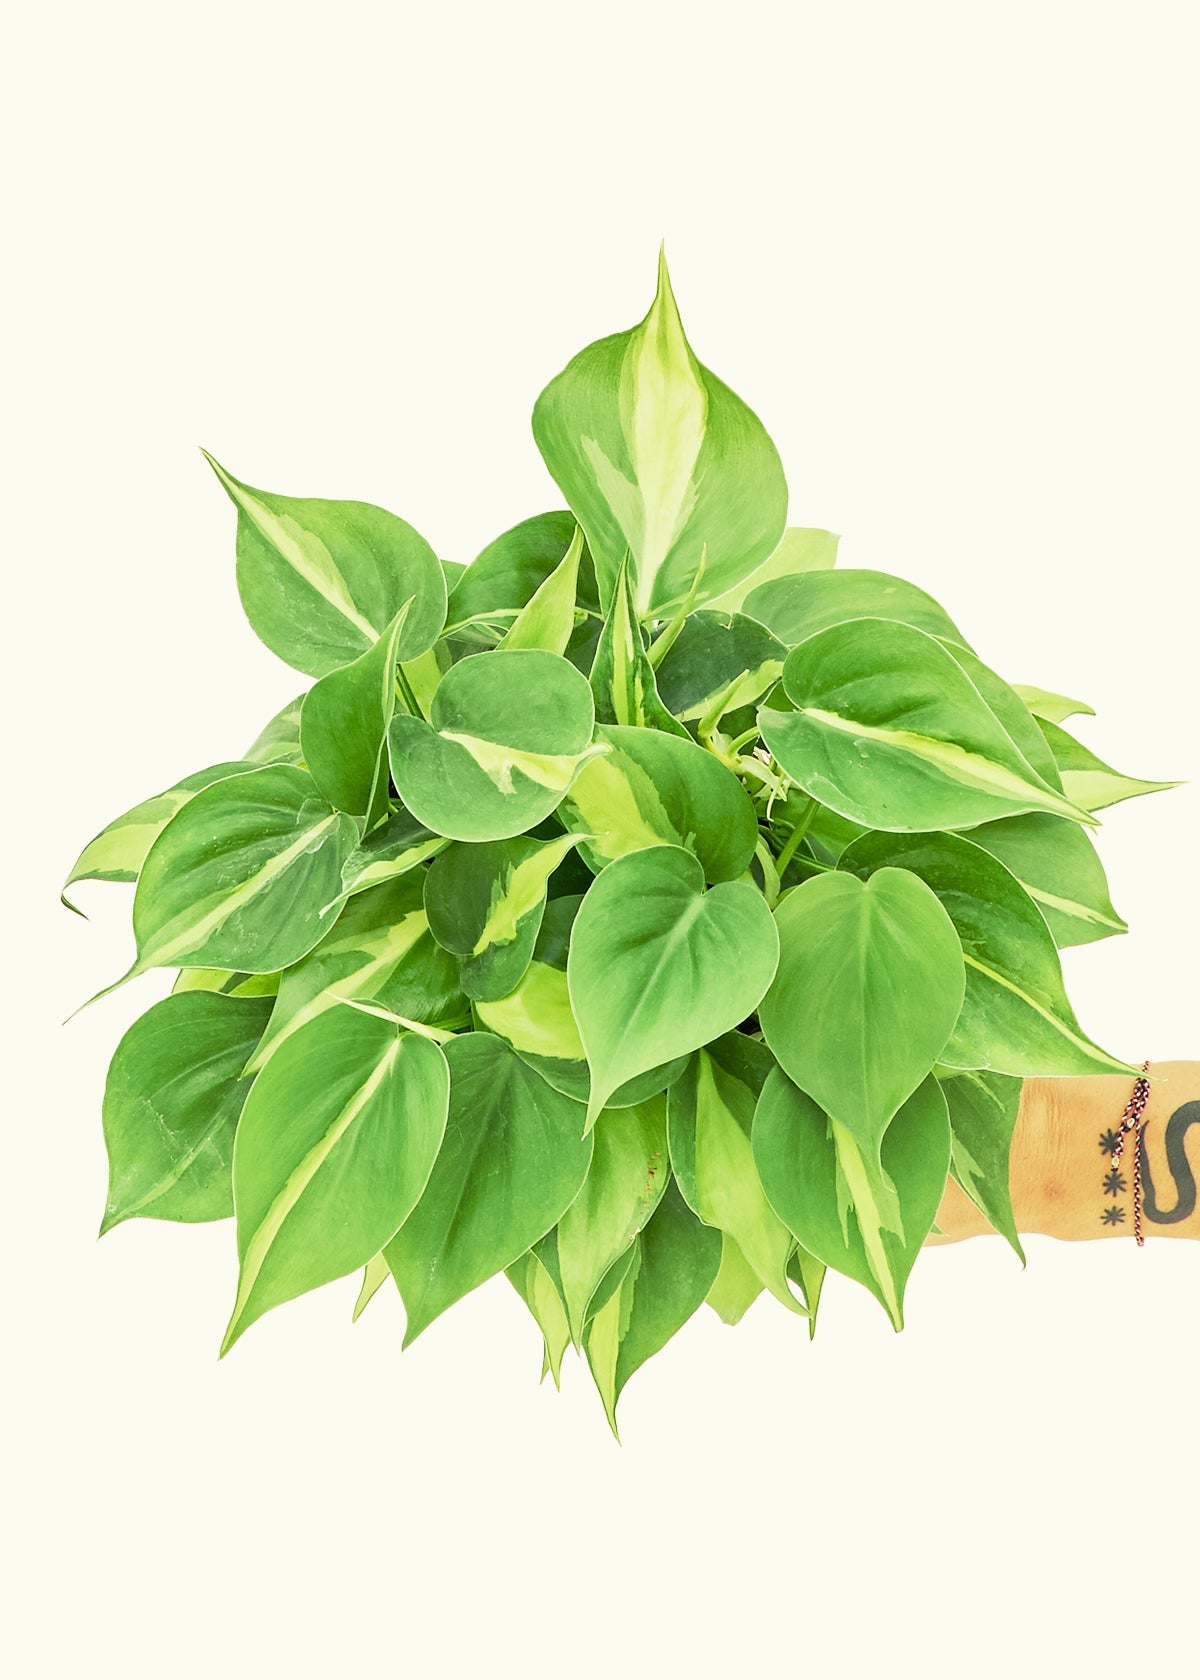 Medium Philodendron 'Brazil' (Philodendron hederaceum)